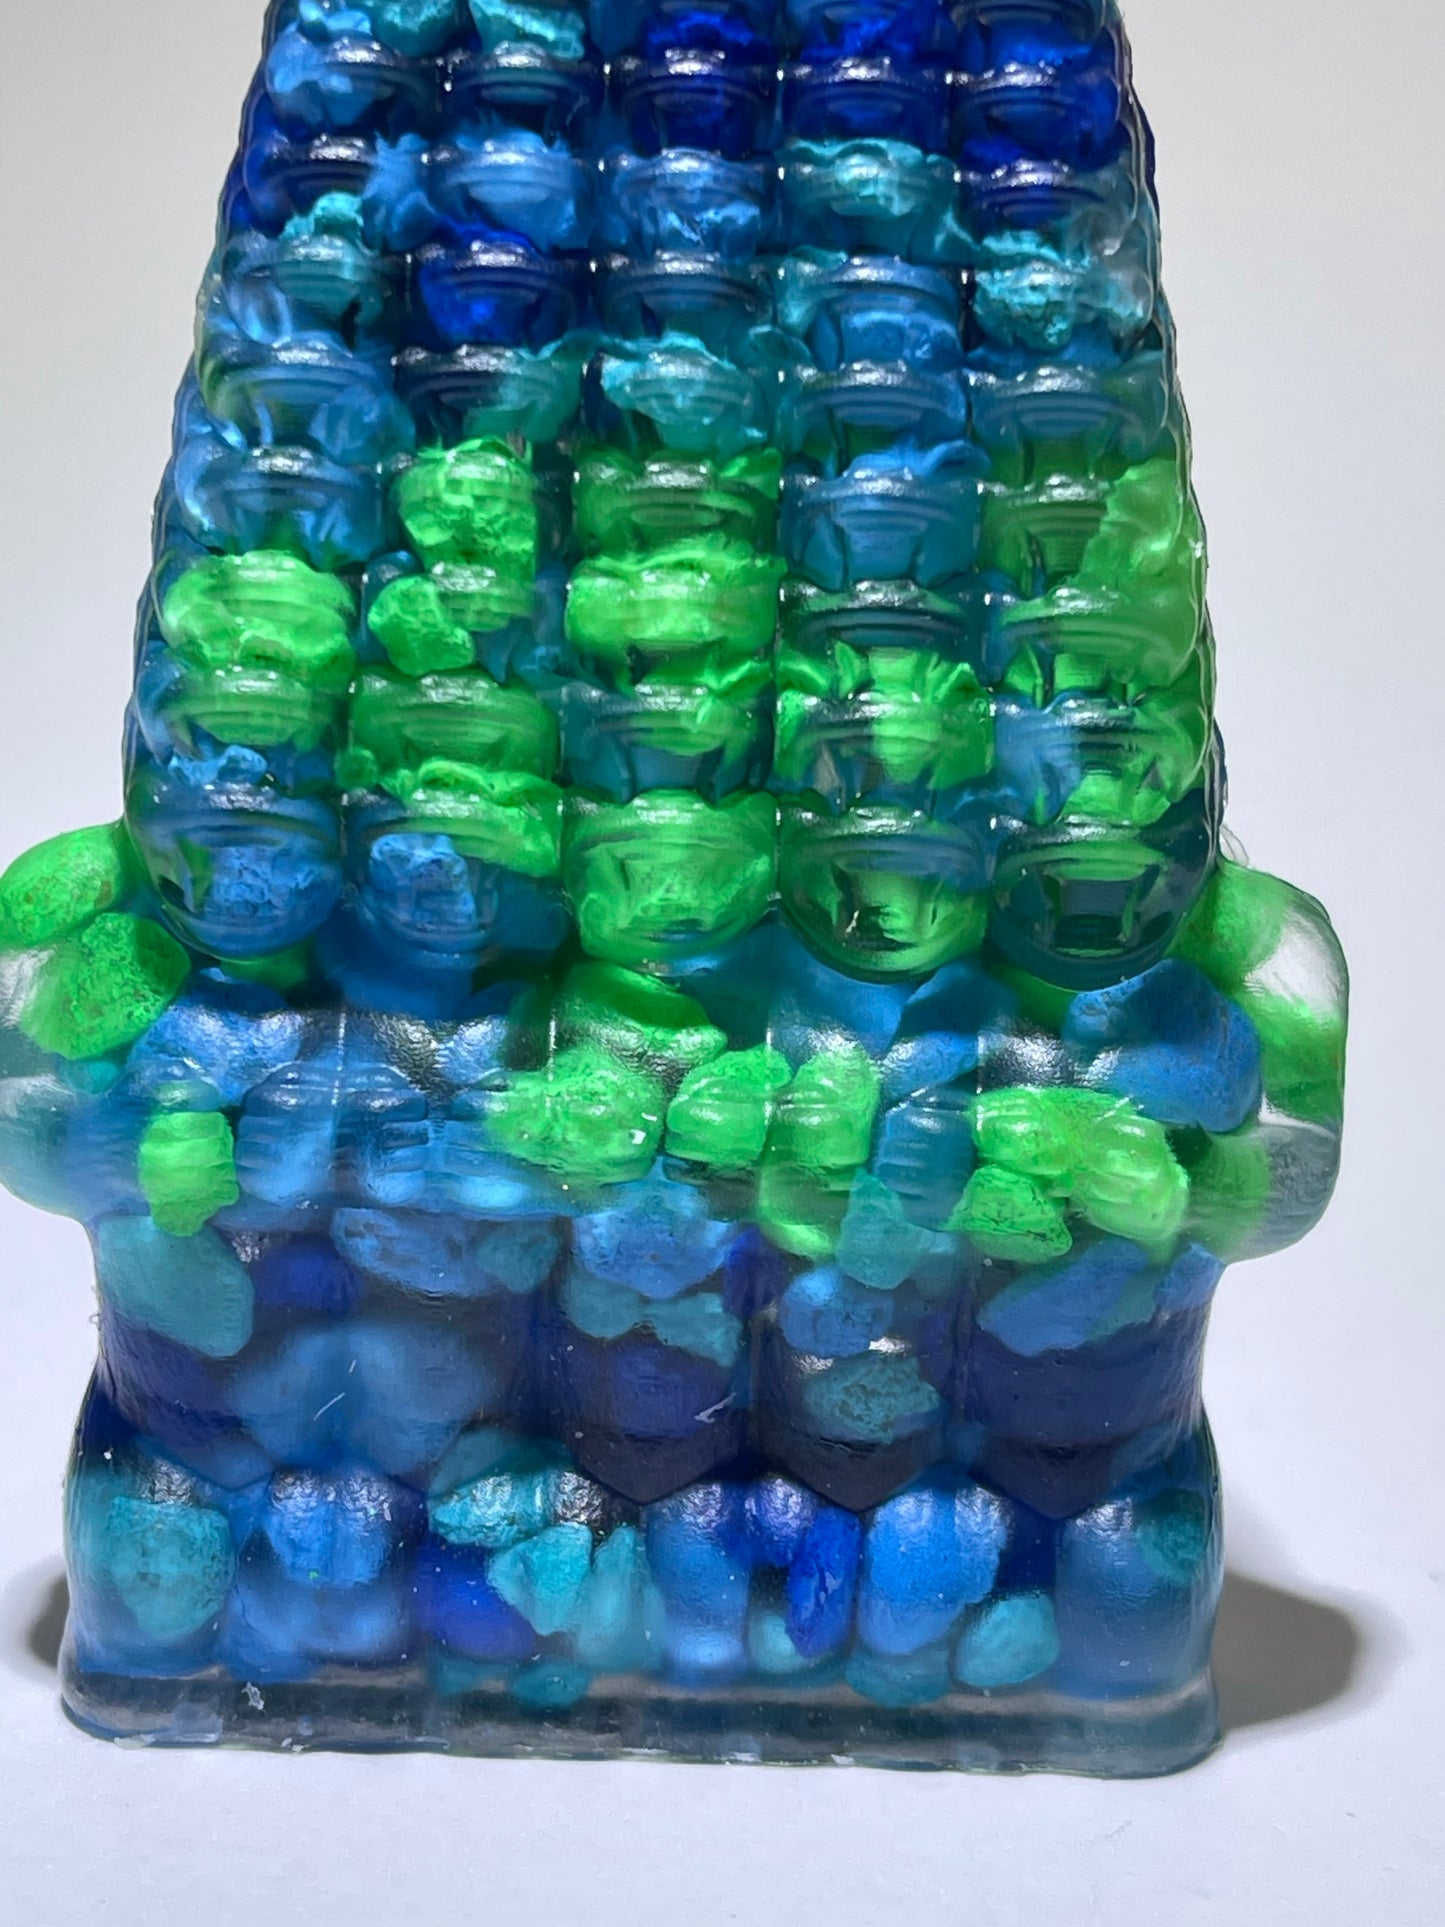 200 Head Ape: Resin Cast with Blue/Green Stones